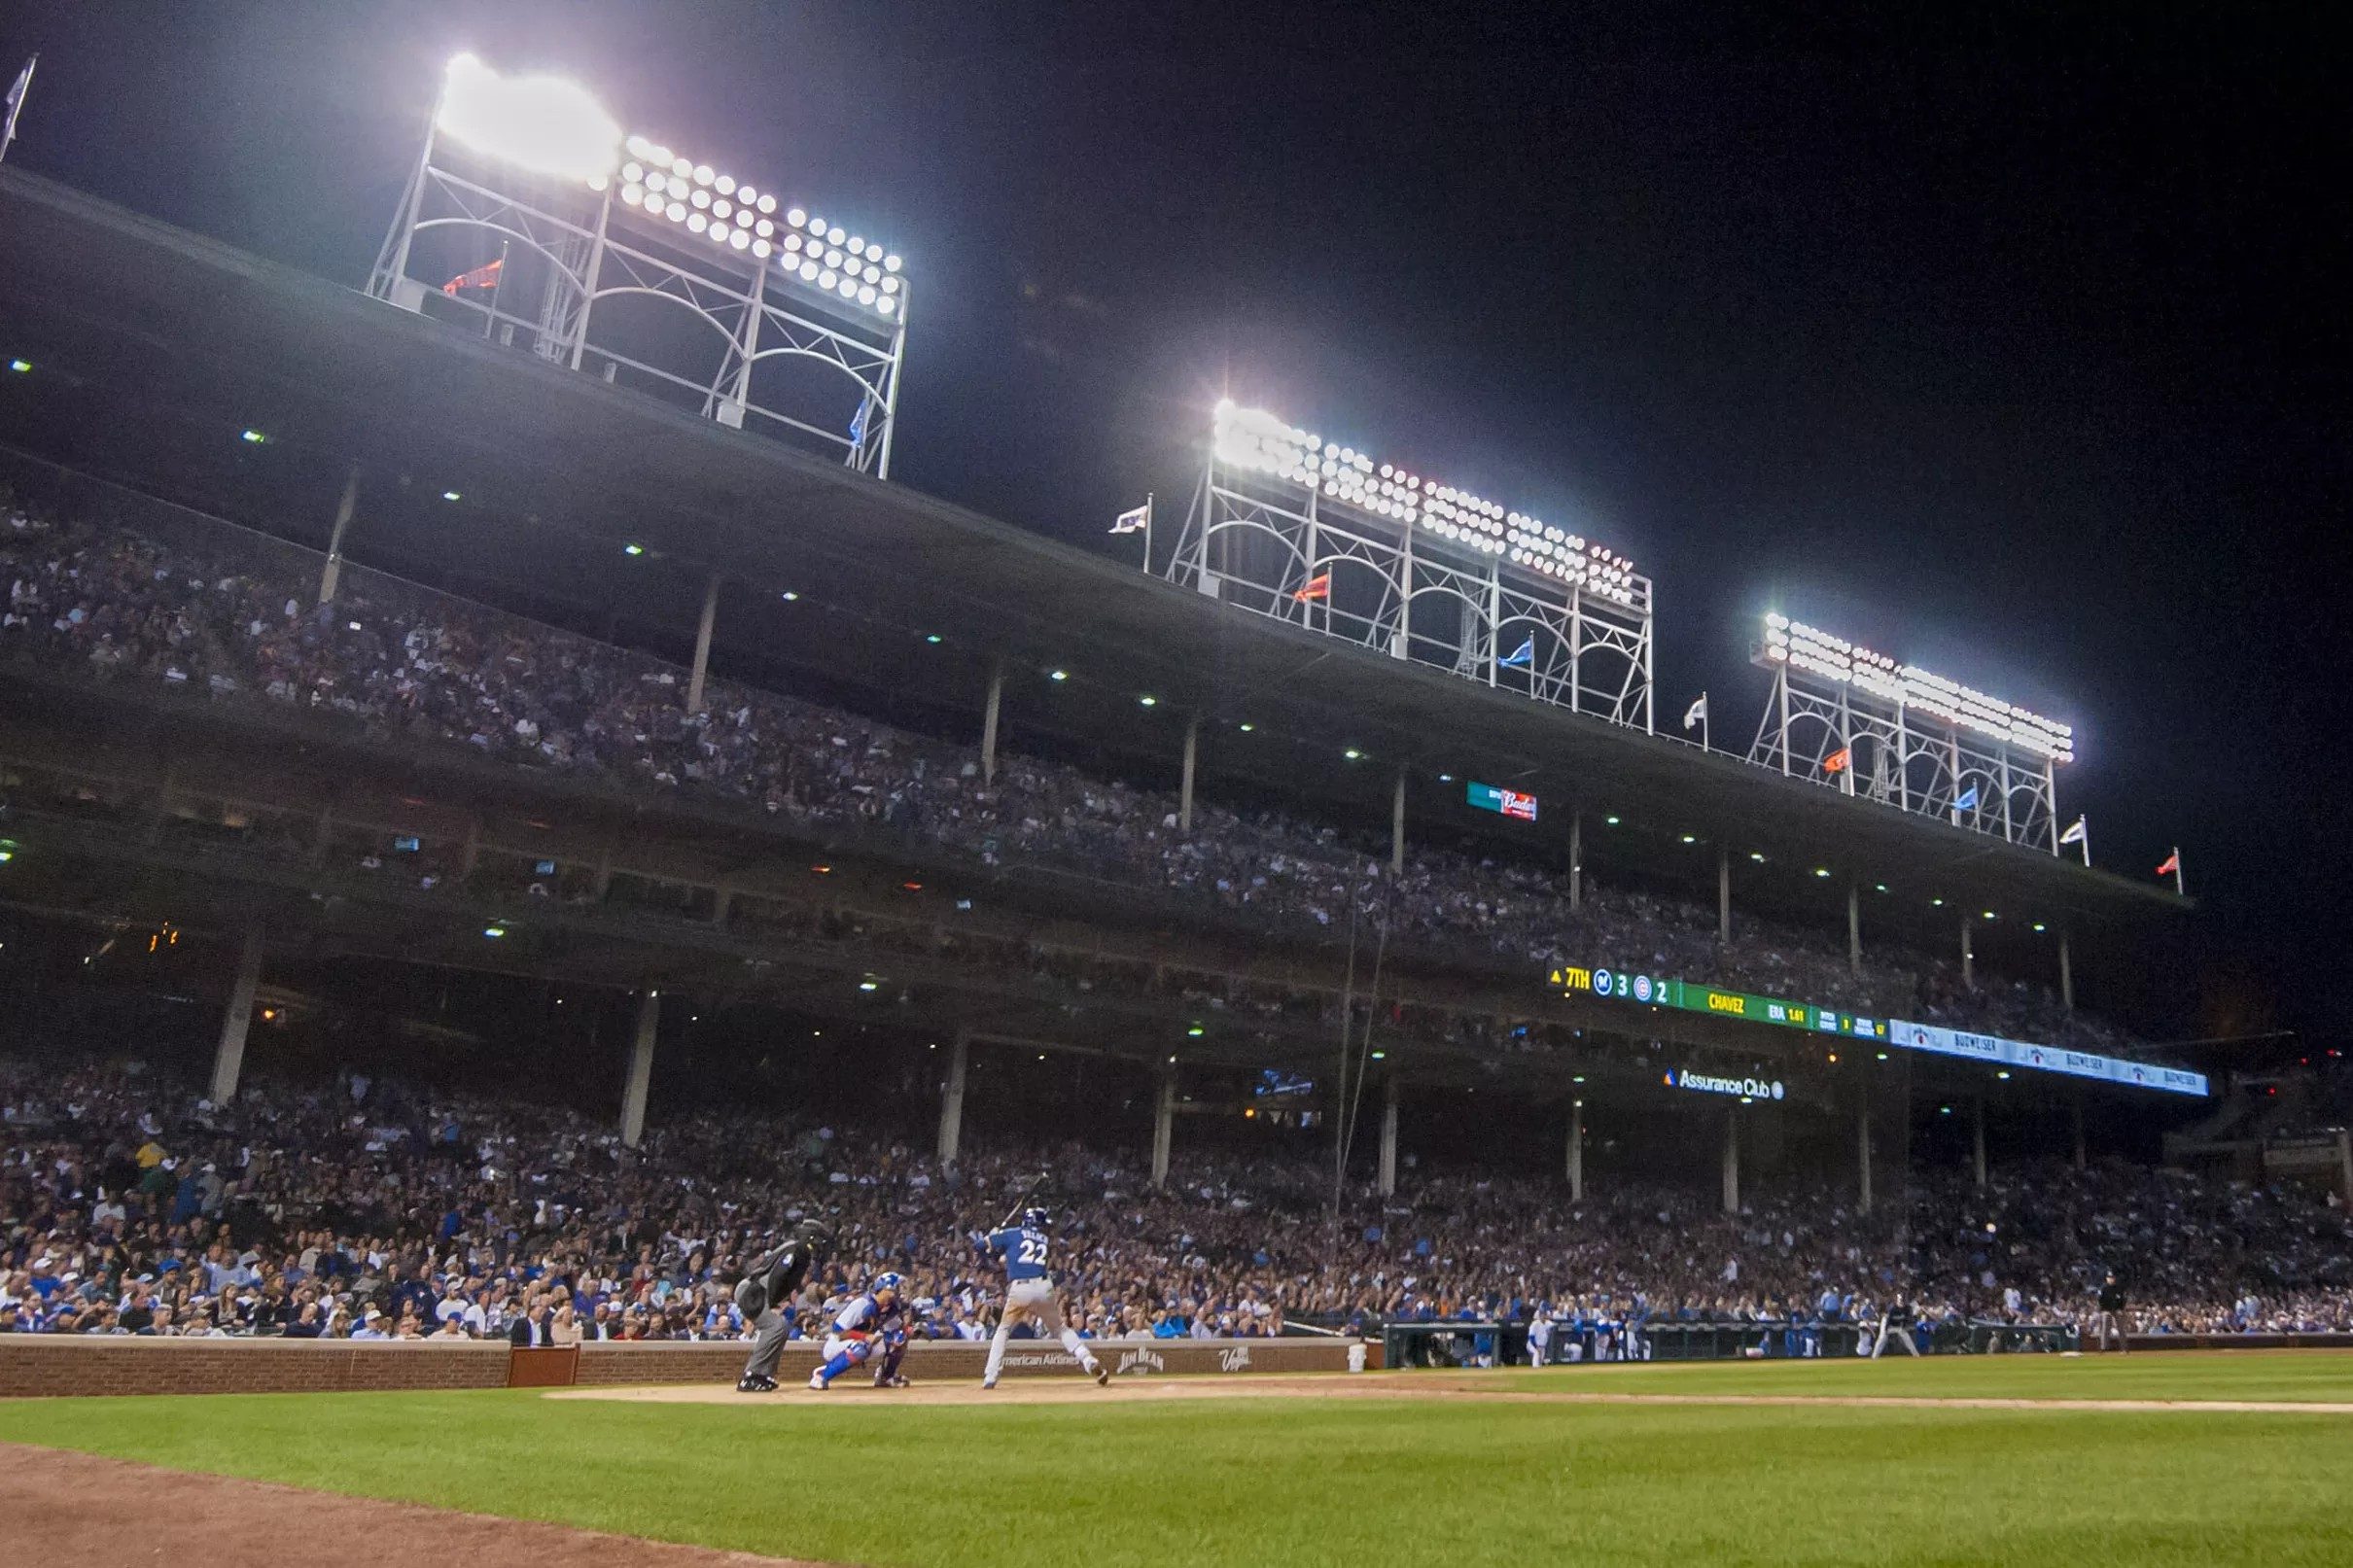 Apple picks up its first lives sports deal with MLB Friday night games.